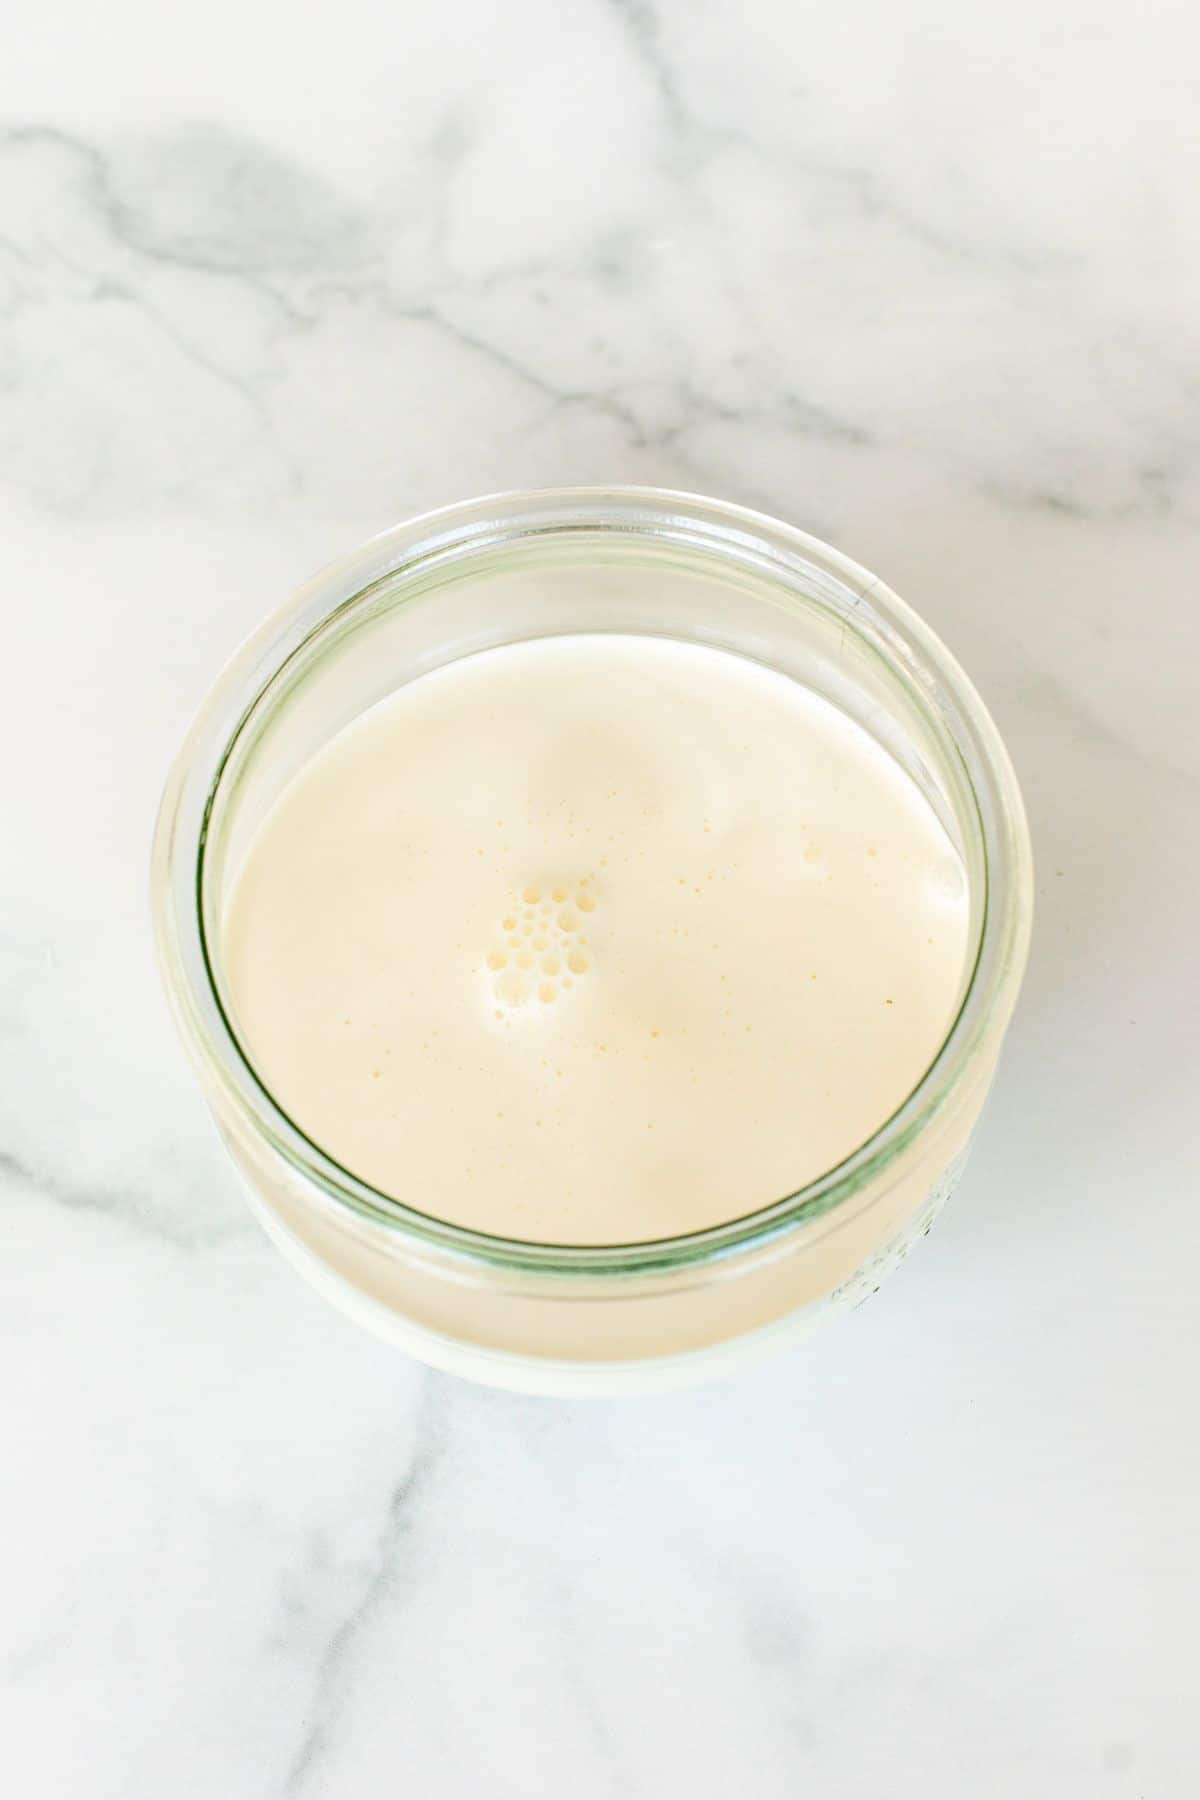 Heavy whipping cream as a creme fraiche substitute in a small clear glass jar on a marble surface.